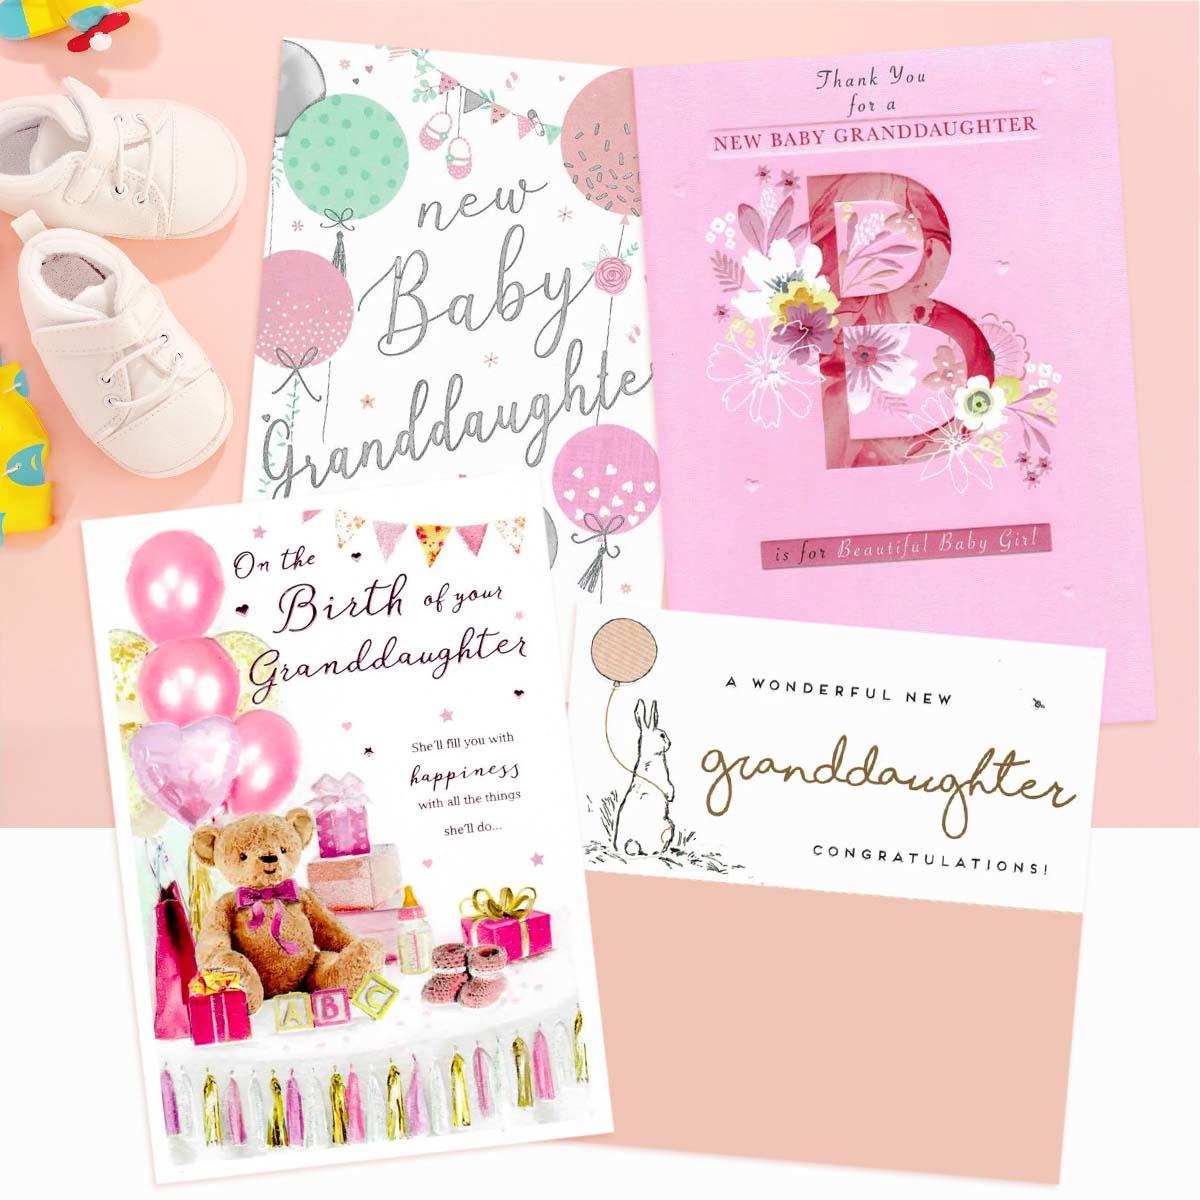 A Selection Of Cards To Show The Depth Of Range In Our Birth Of Granddaughter Baby Section